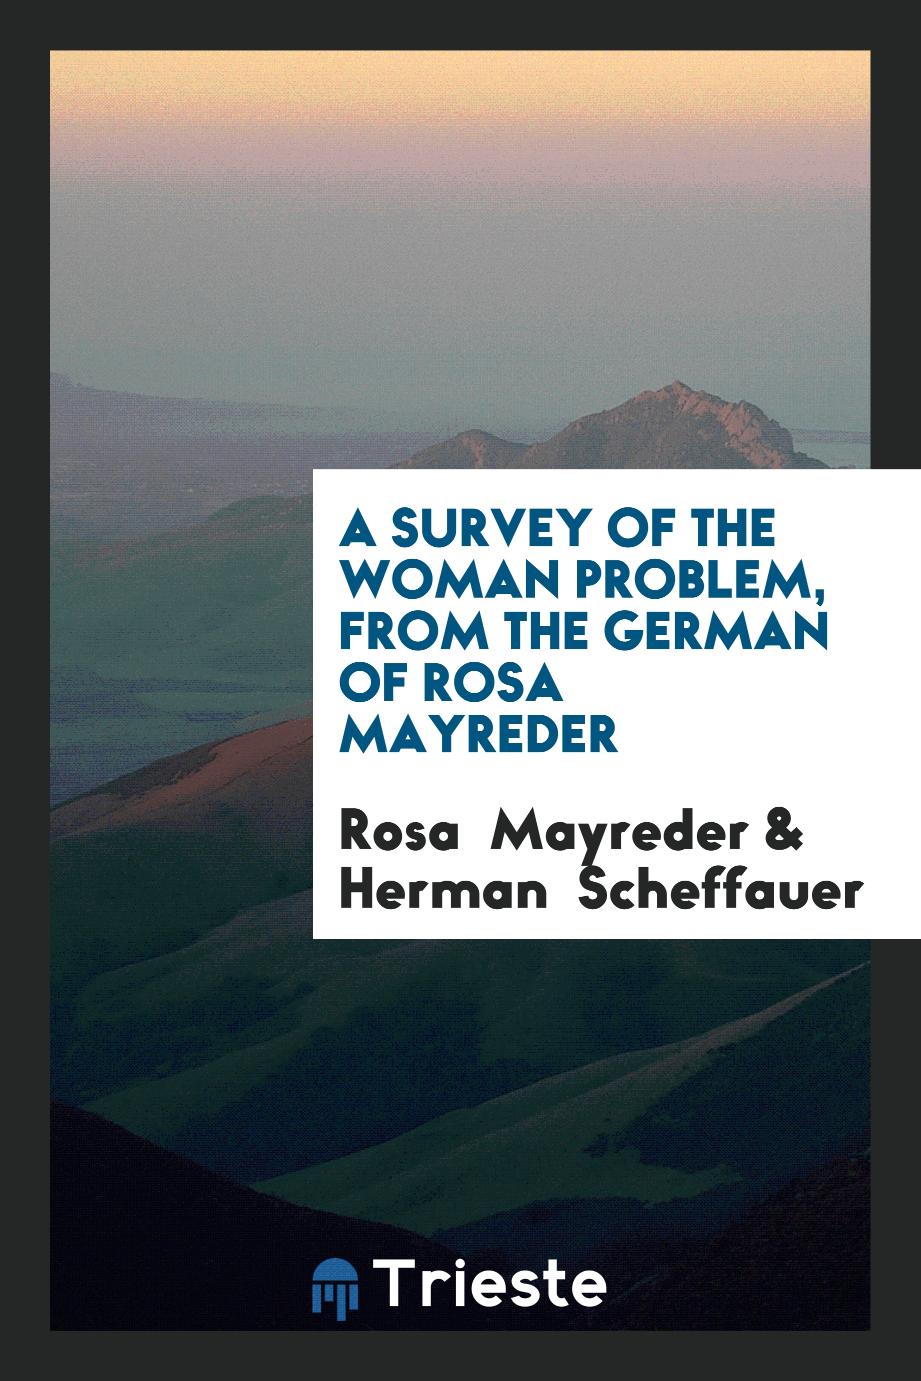 A Survey of the Woman Problem, from the German of Rosa Mayreder